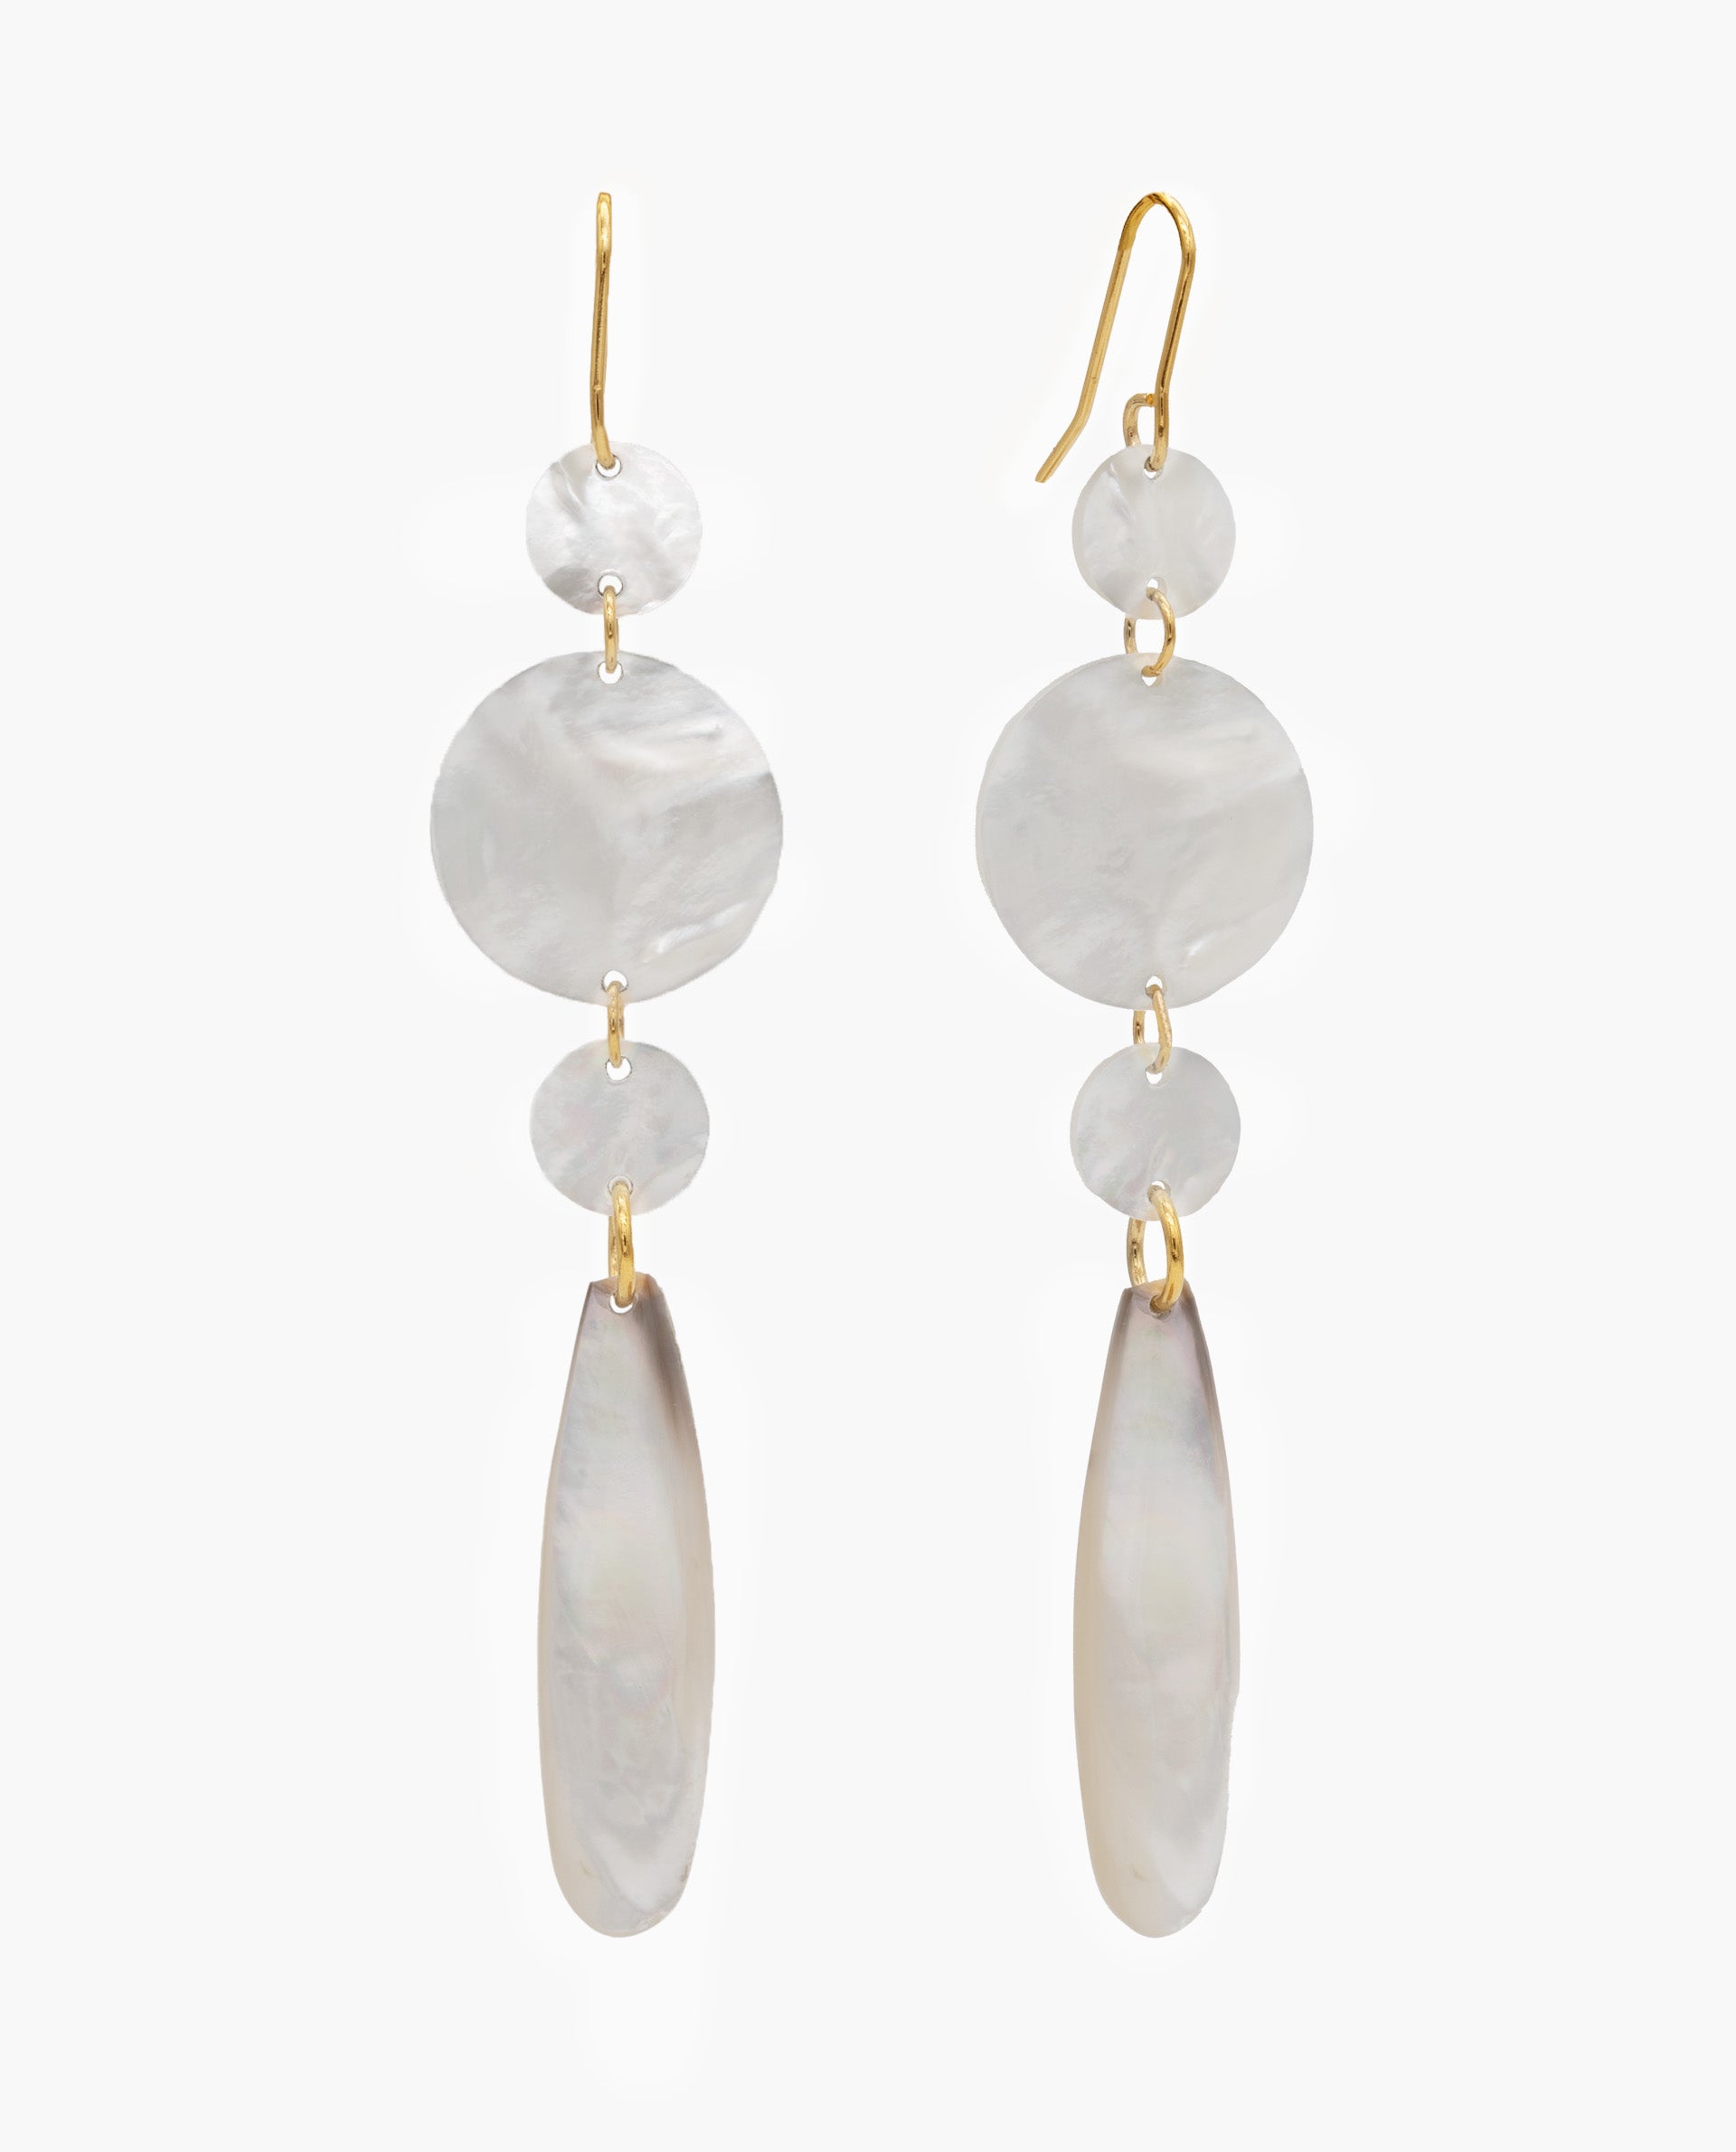 MOTHER-OF-PEARL SHAPES EARRINGS - GOLD PLATED